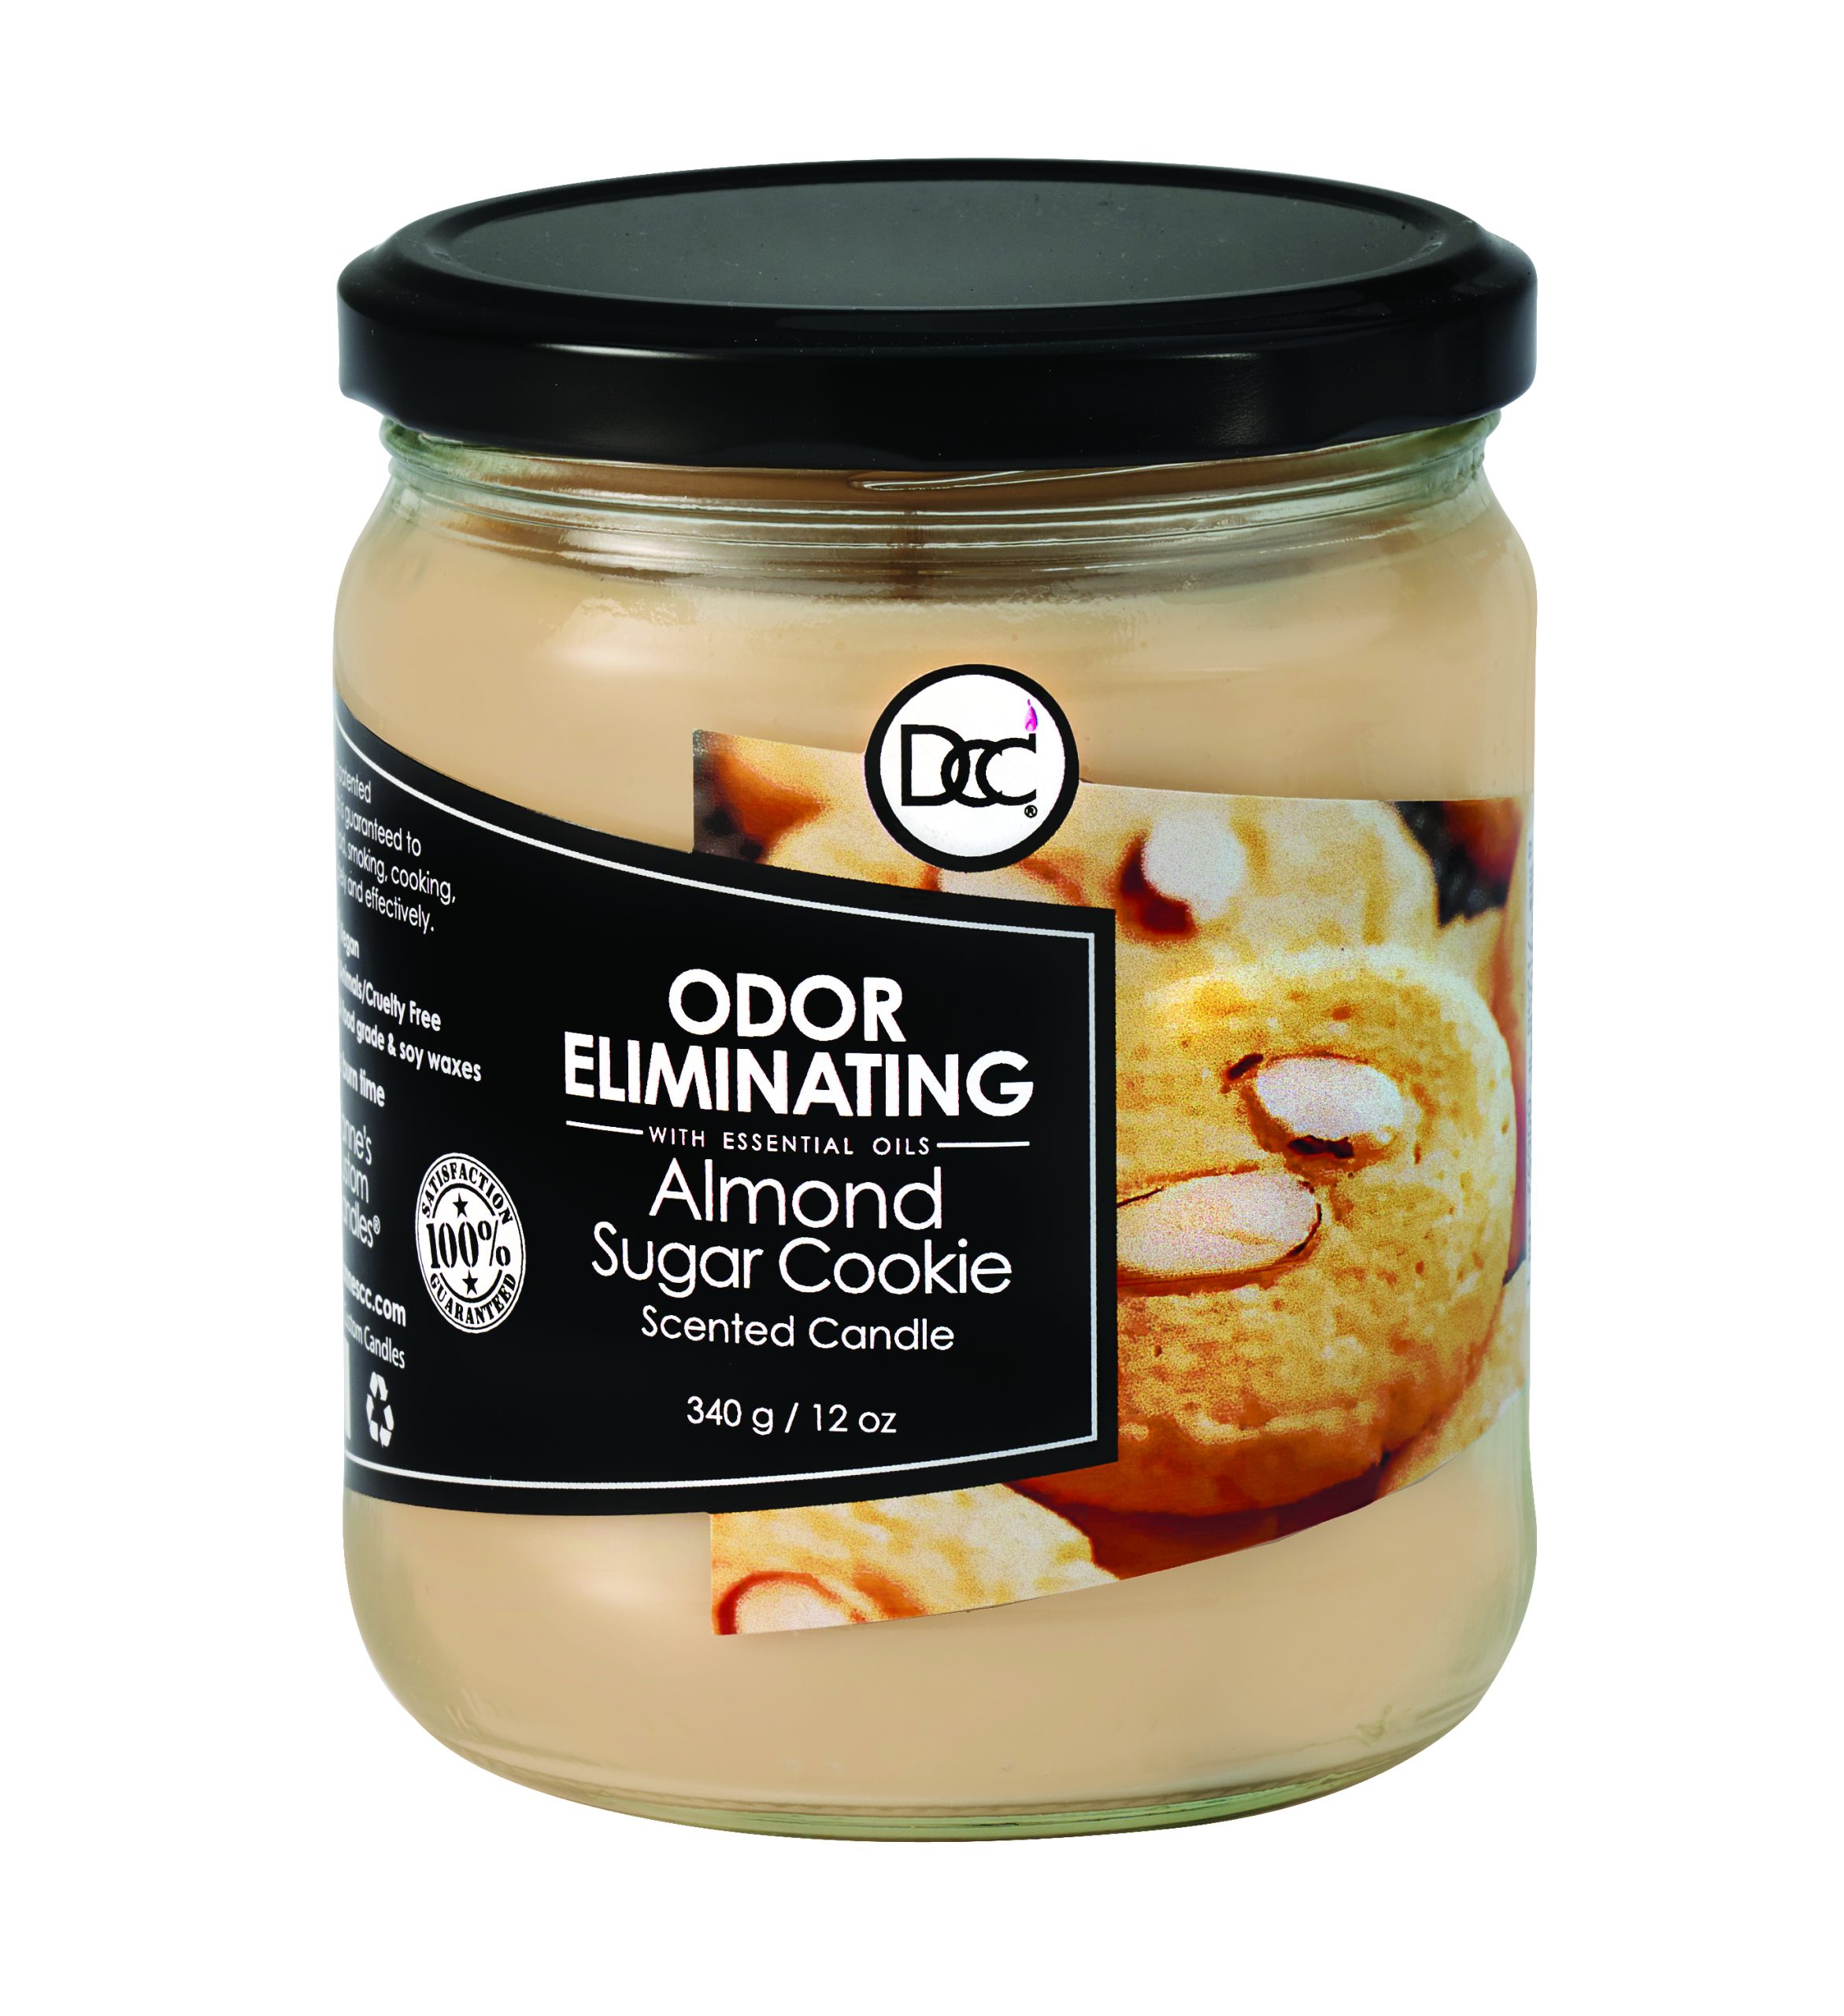 Almond Sugar Cookie Odor Eliminating Candle